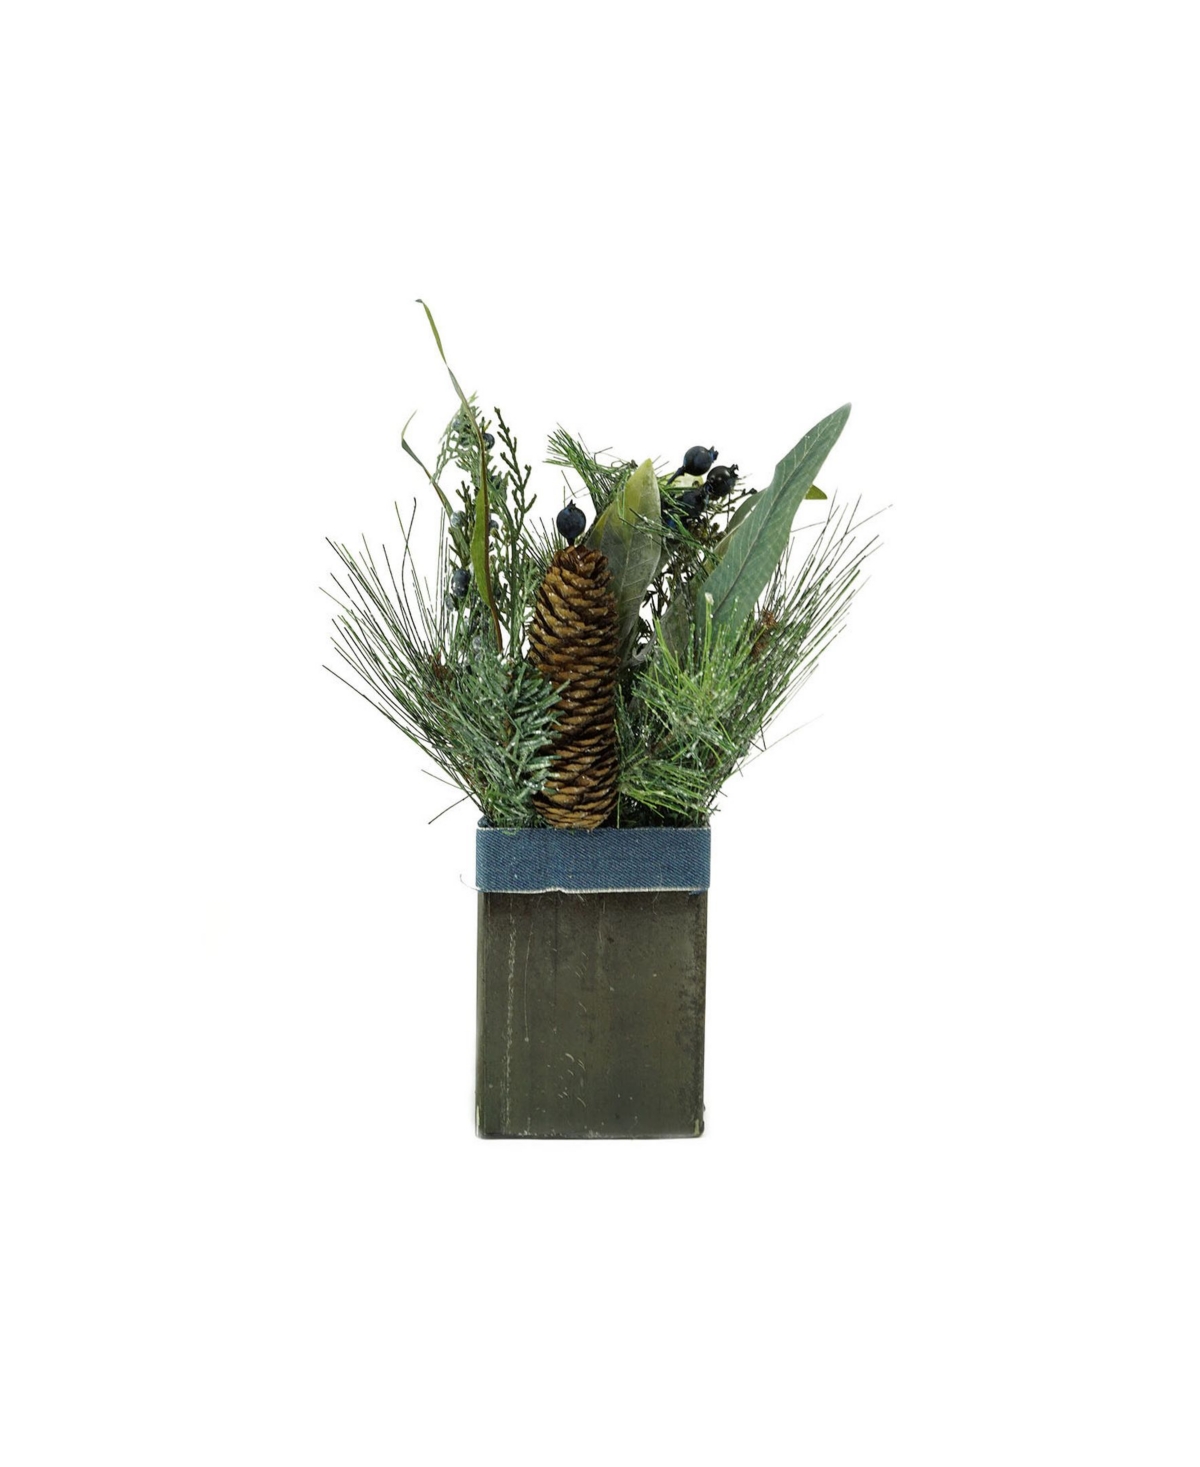 13" Square Potted Frosted Blueberry and Pine Artificial Christmas Arrangement - Green